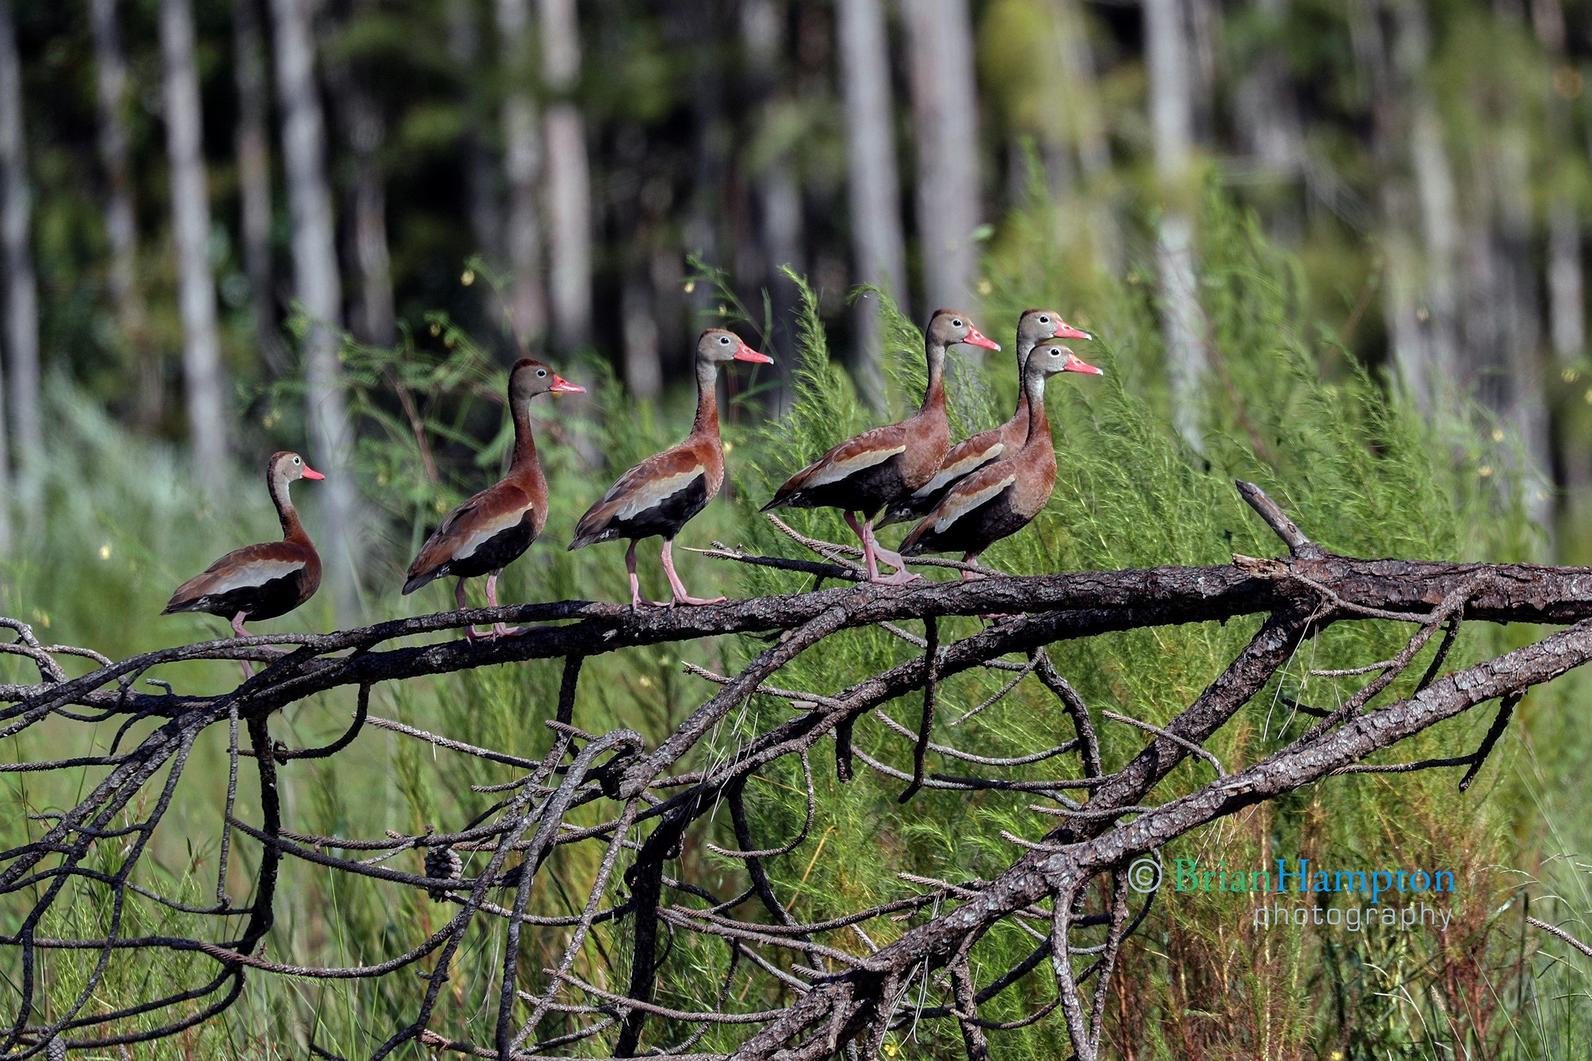 Black Bellied Whistling Ducks are a common sight in the marsh and prairie restoration plots.